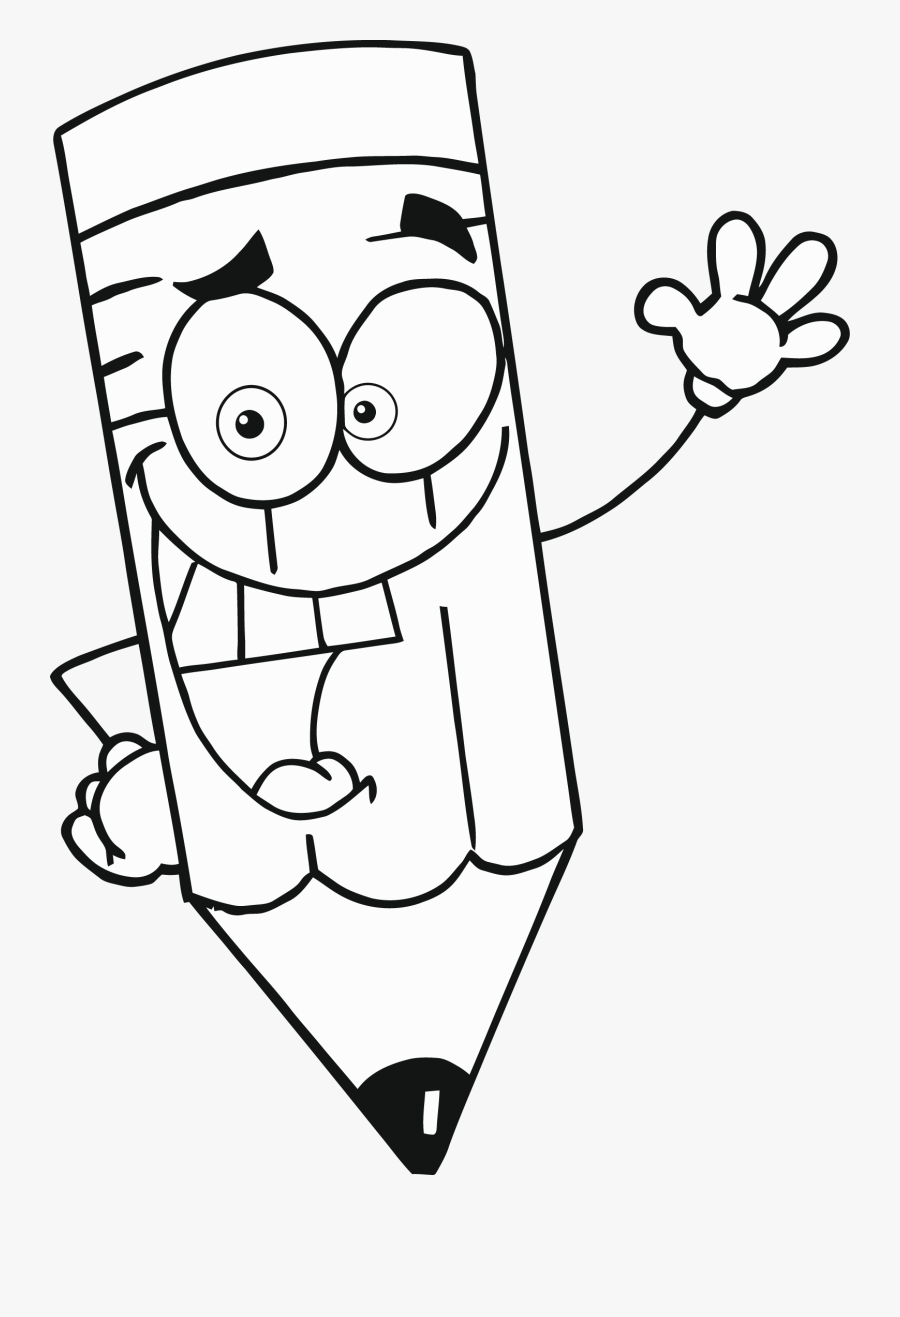 Pencil Coloring Pages For Kids - Pencil Outline With Cartoon, Transparent Clipart